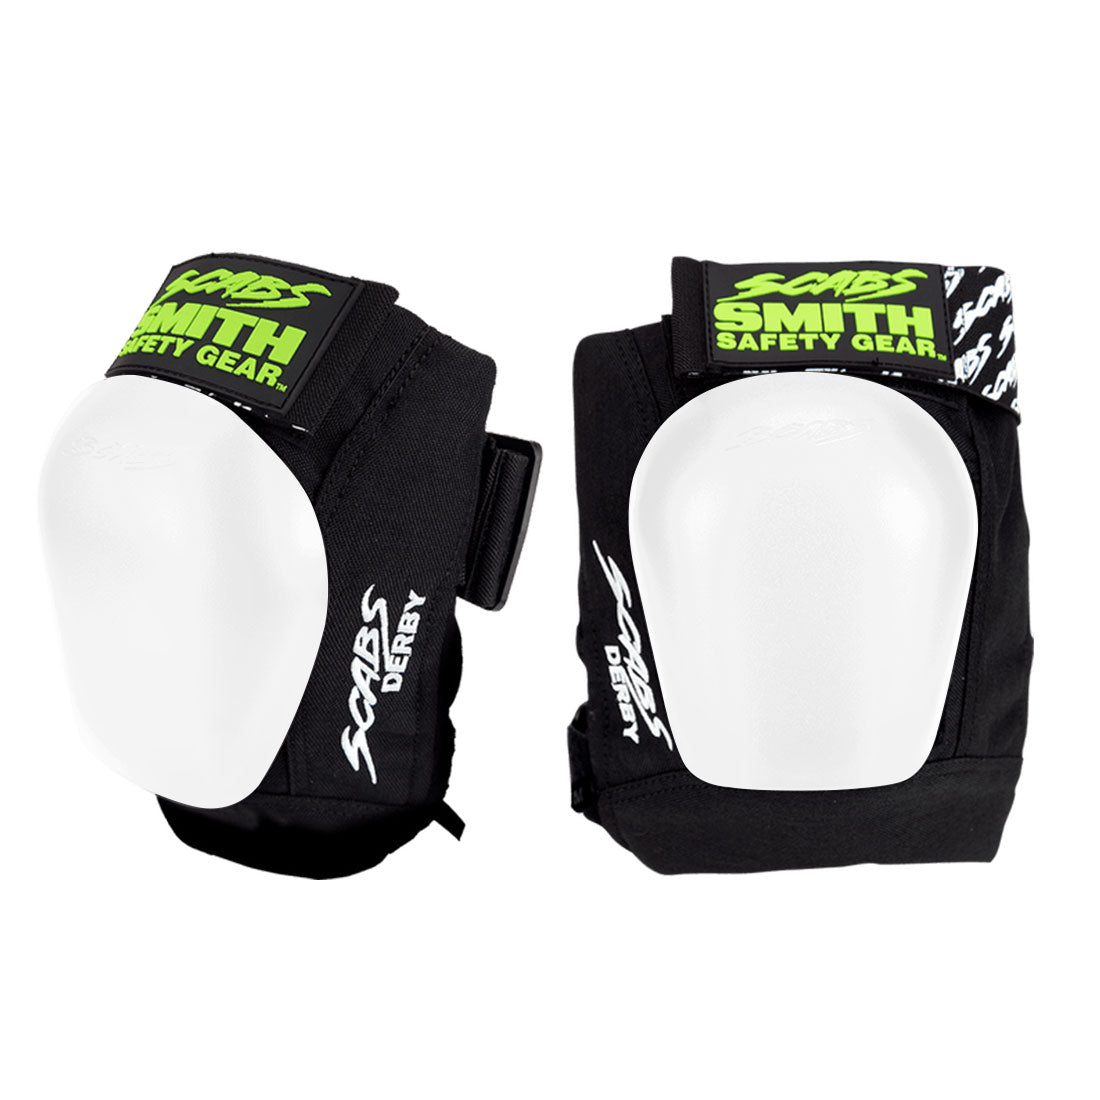 Smith Scabs Derby Knee - Black/White Protective Gear